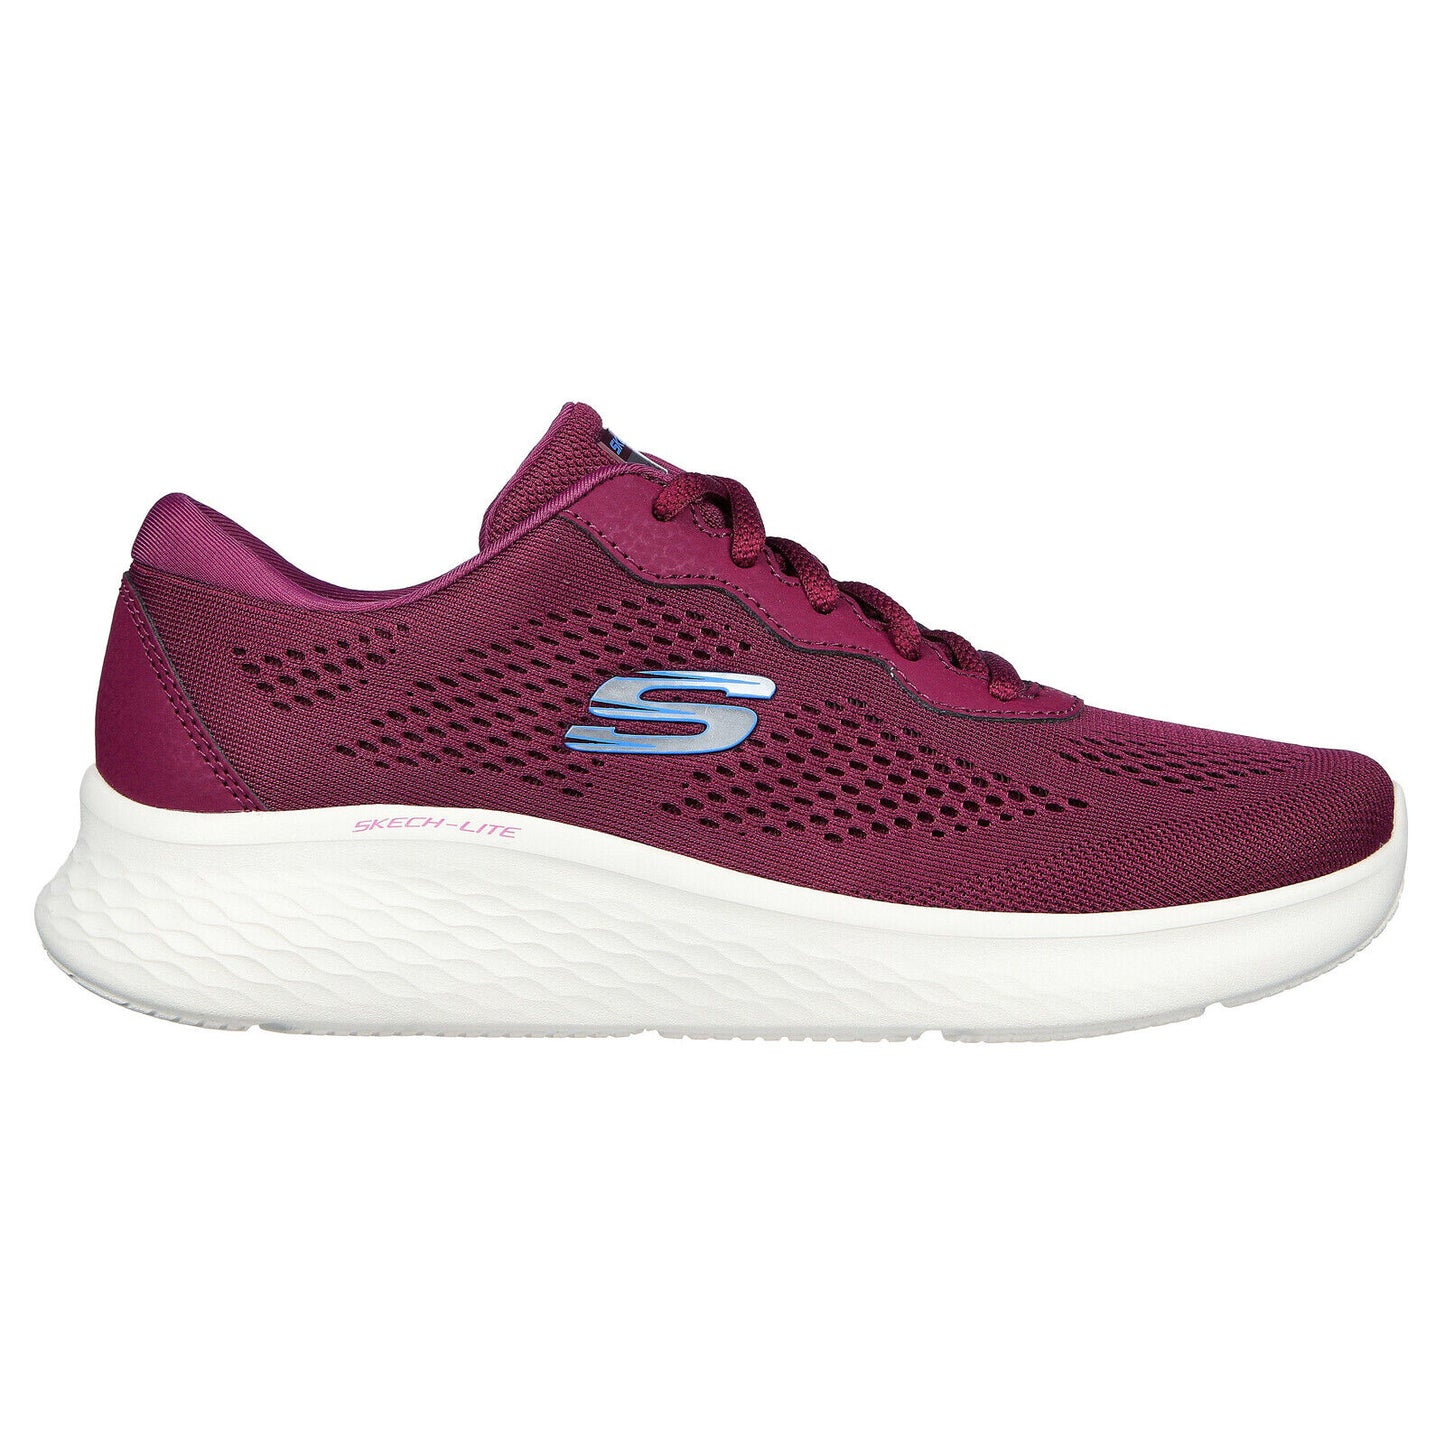 Skechers Skechlite Pro Perfect Time Plum Vegan Trainers Shoes